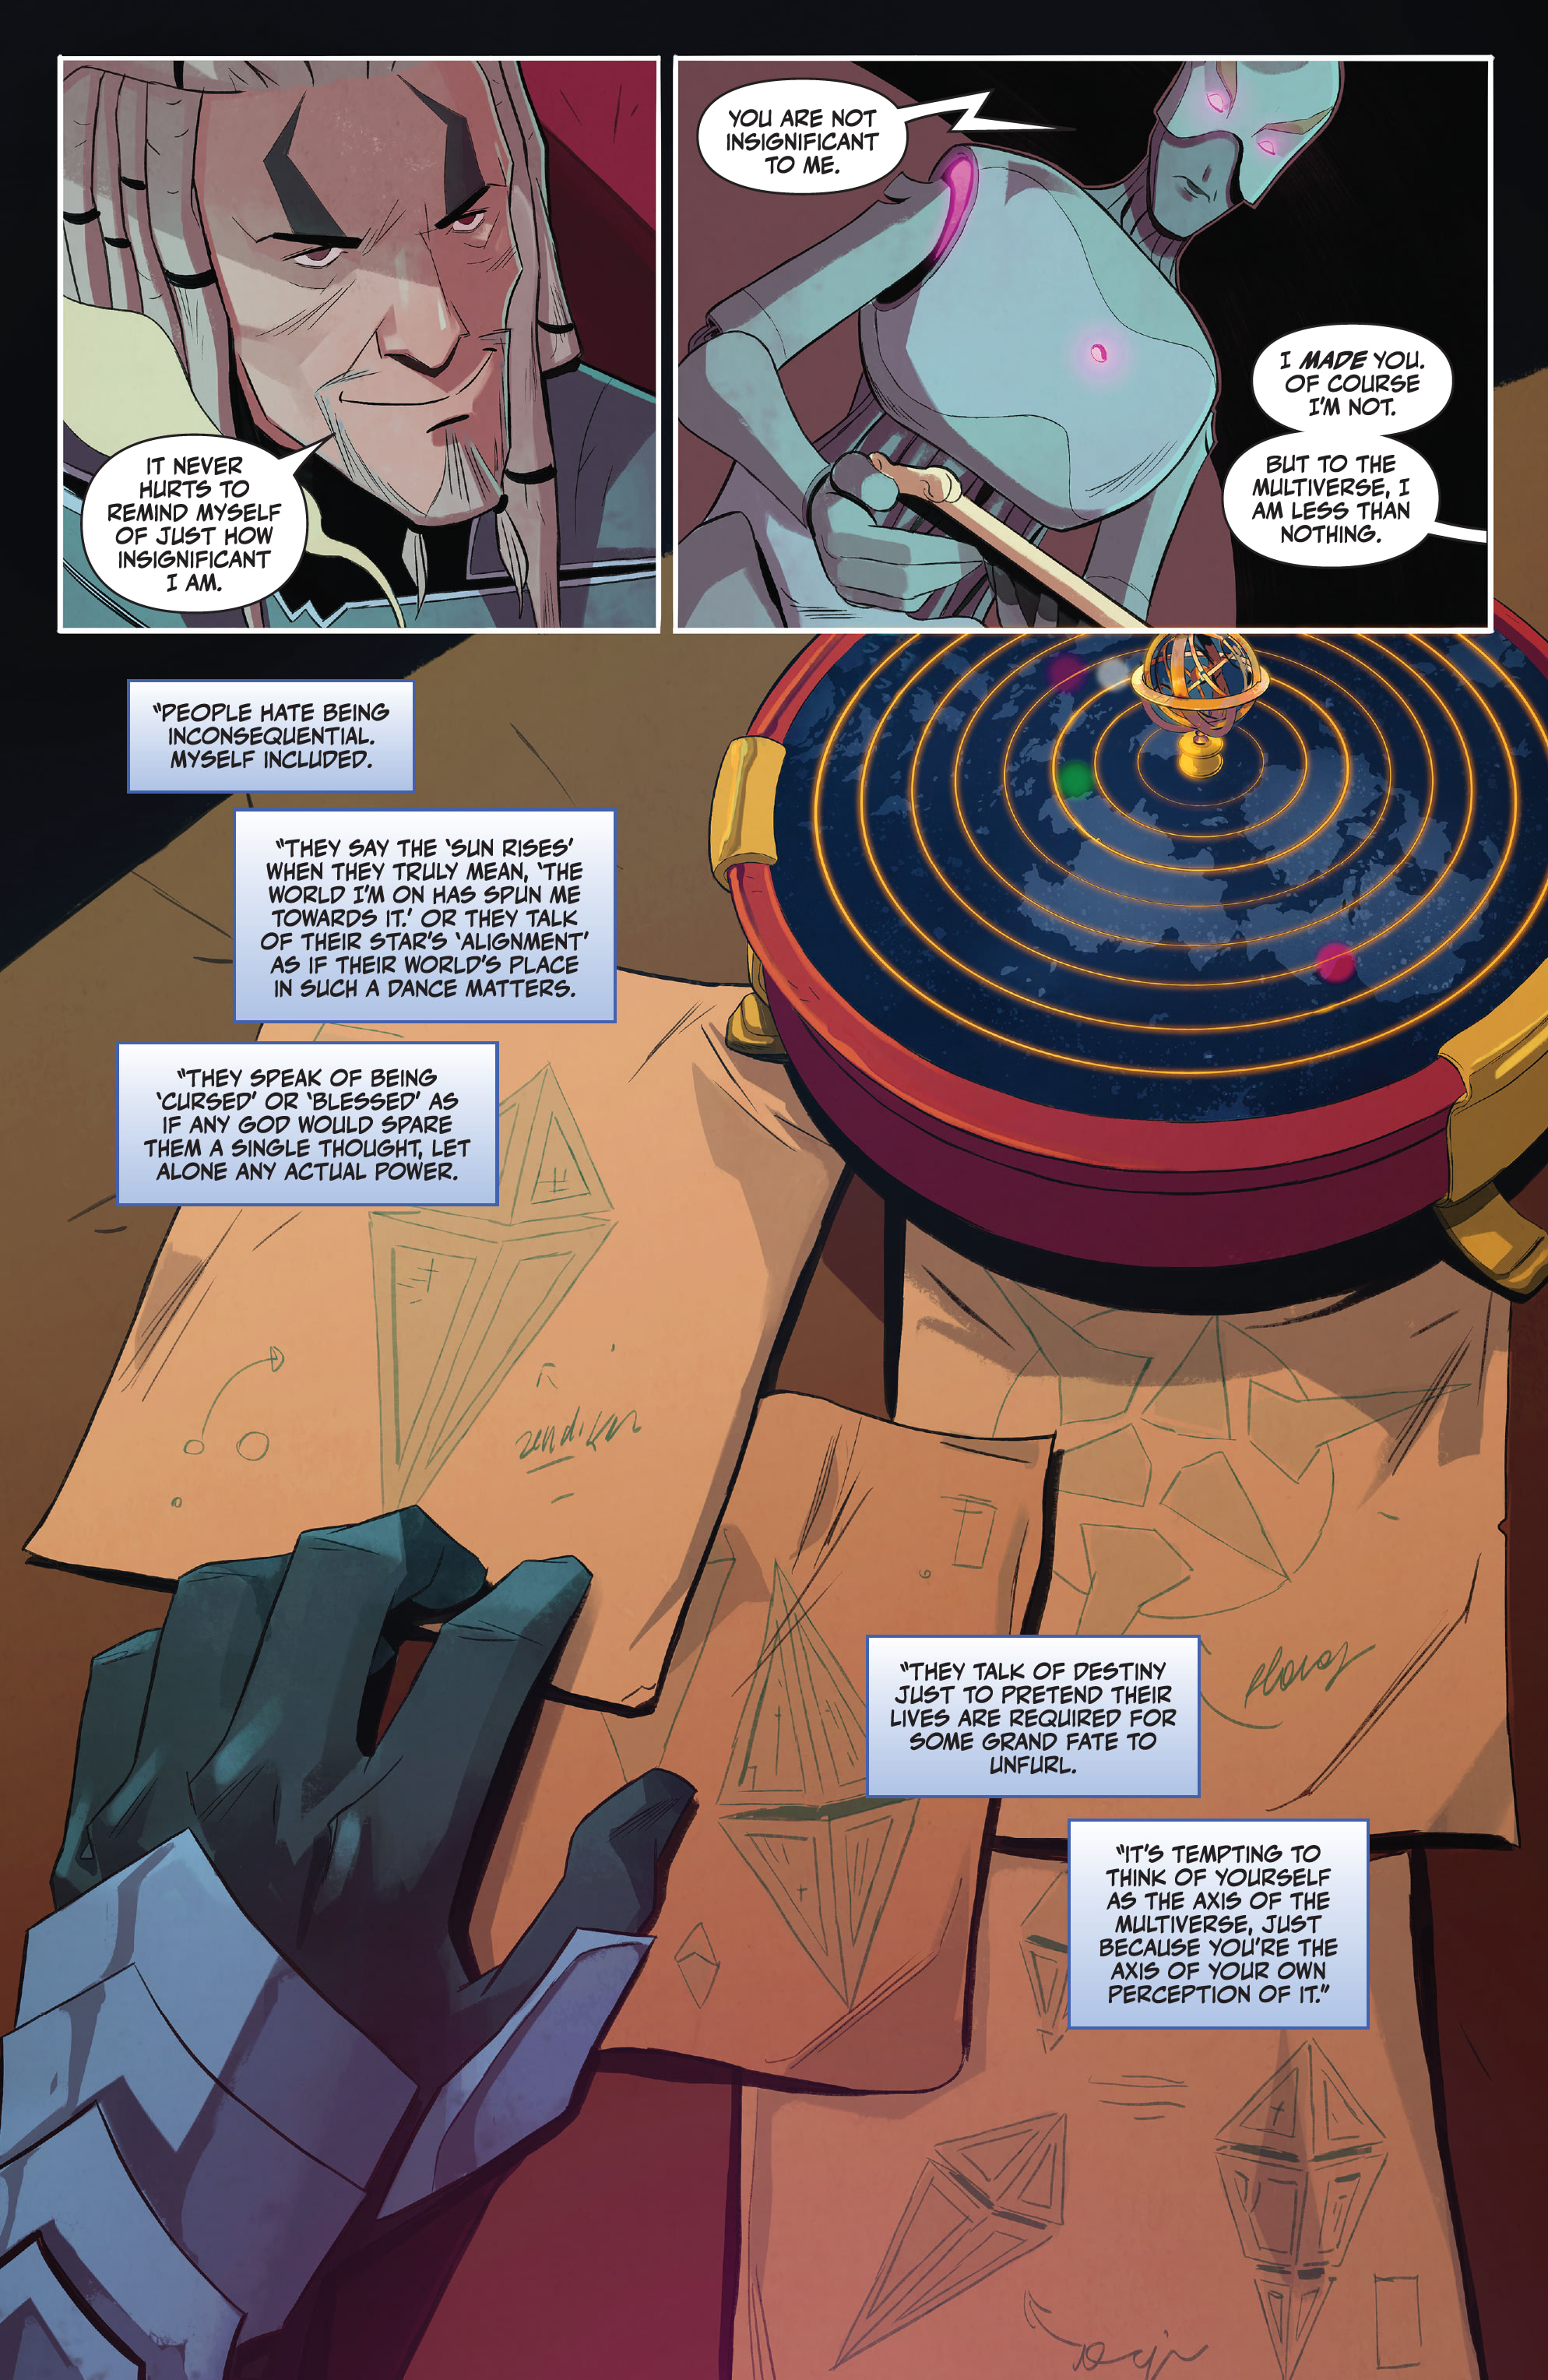 Magic: Master of Metal (2021-): Chapter 1 - Page 4